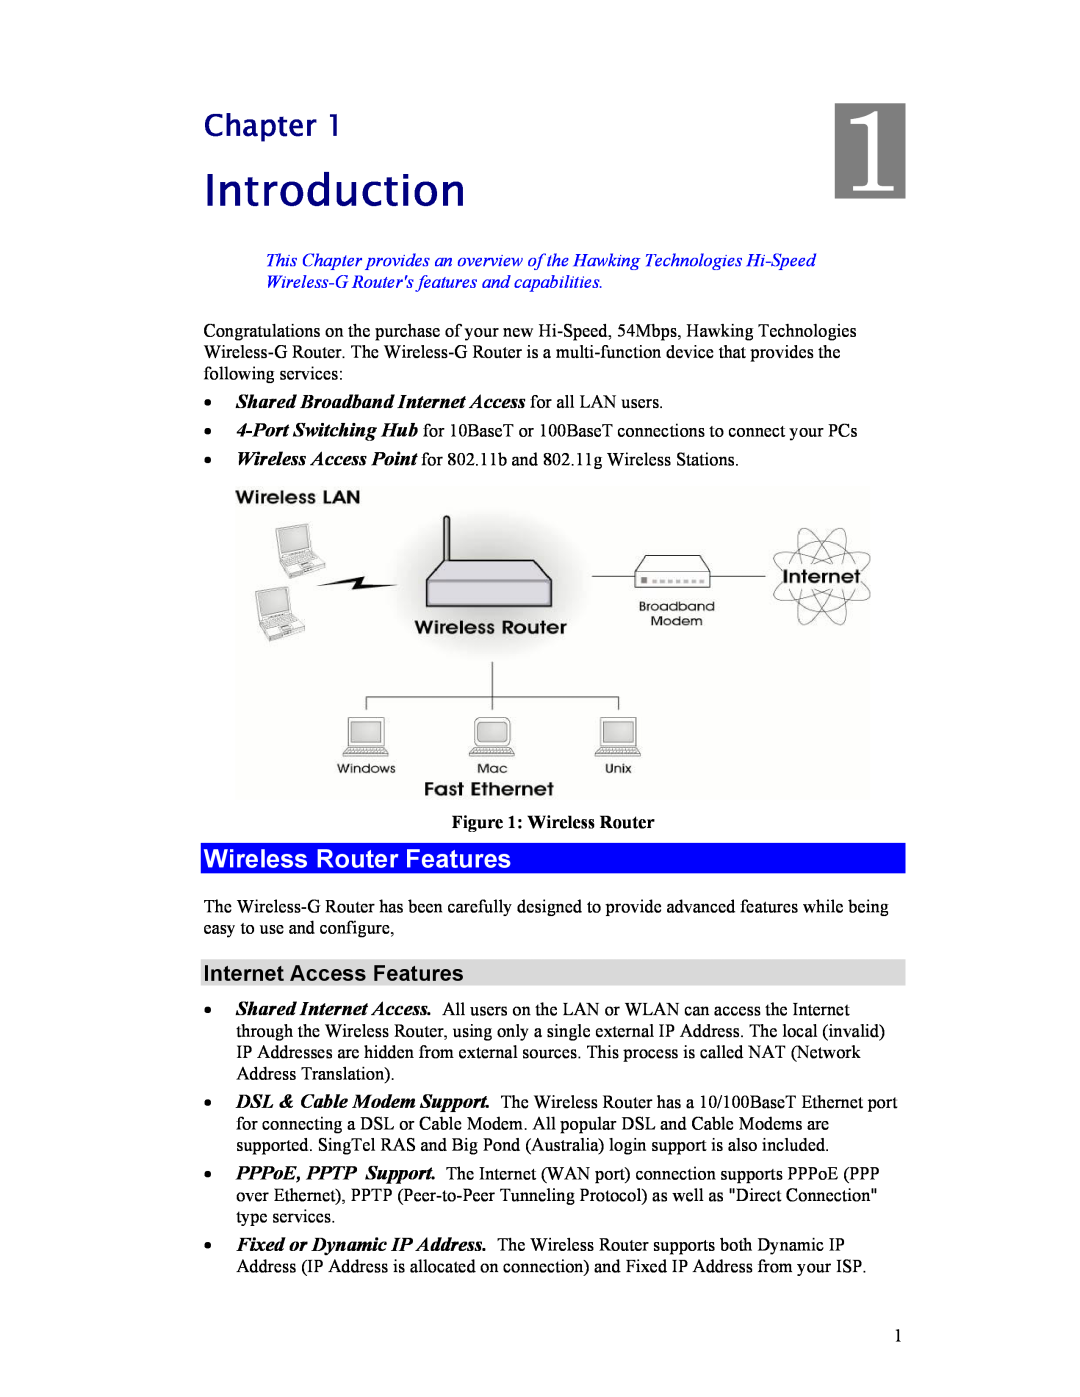 Hawking Technology HWR54G manual Introduction, Chapter, Wireless Router Features, Internet Access Features 